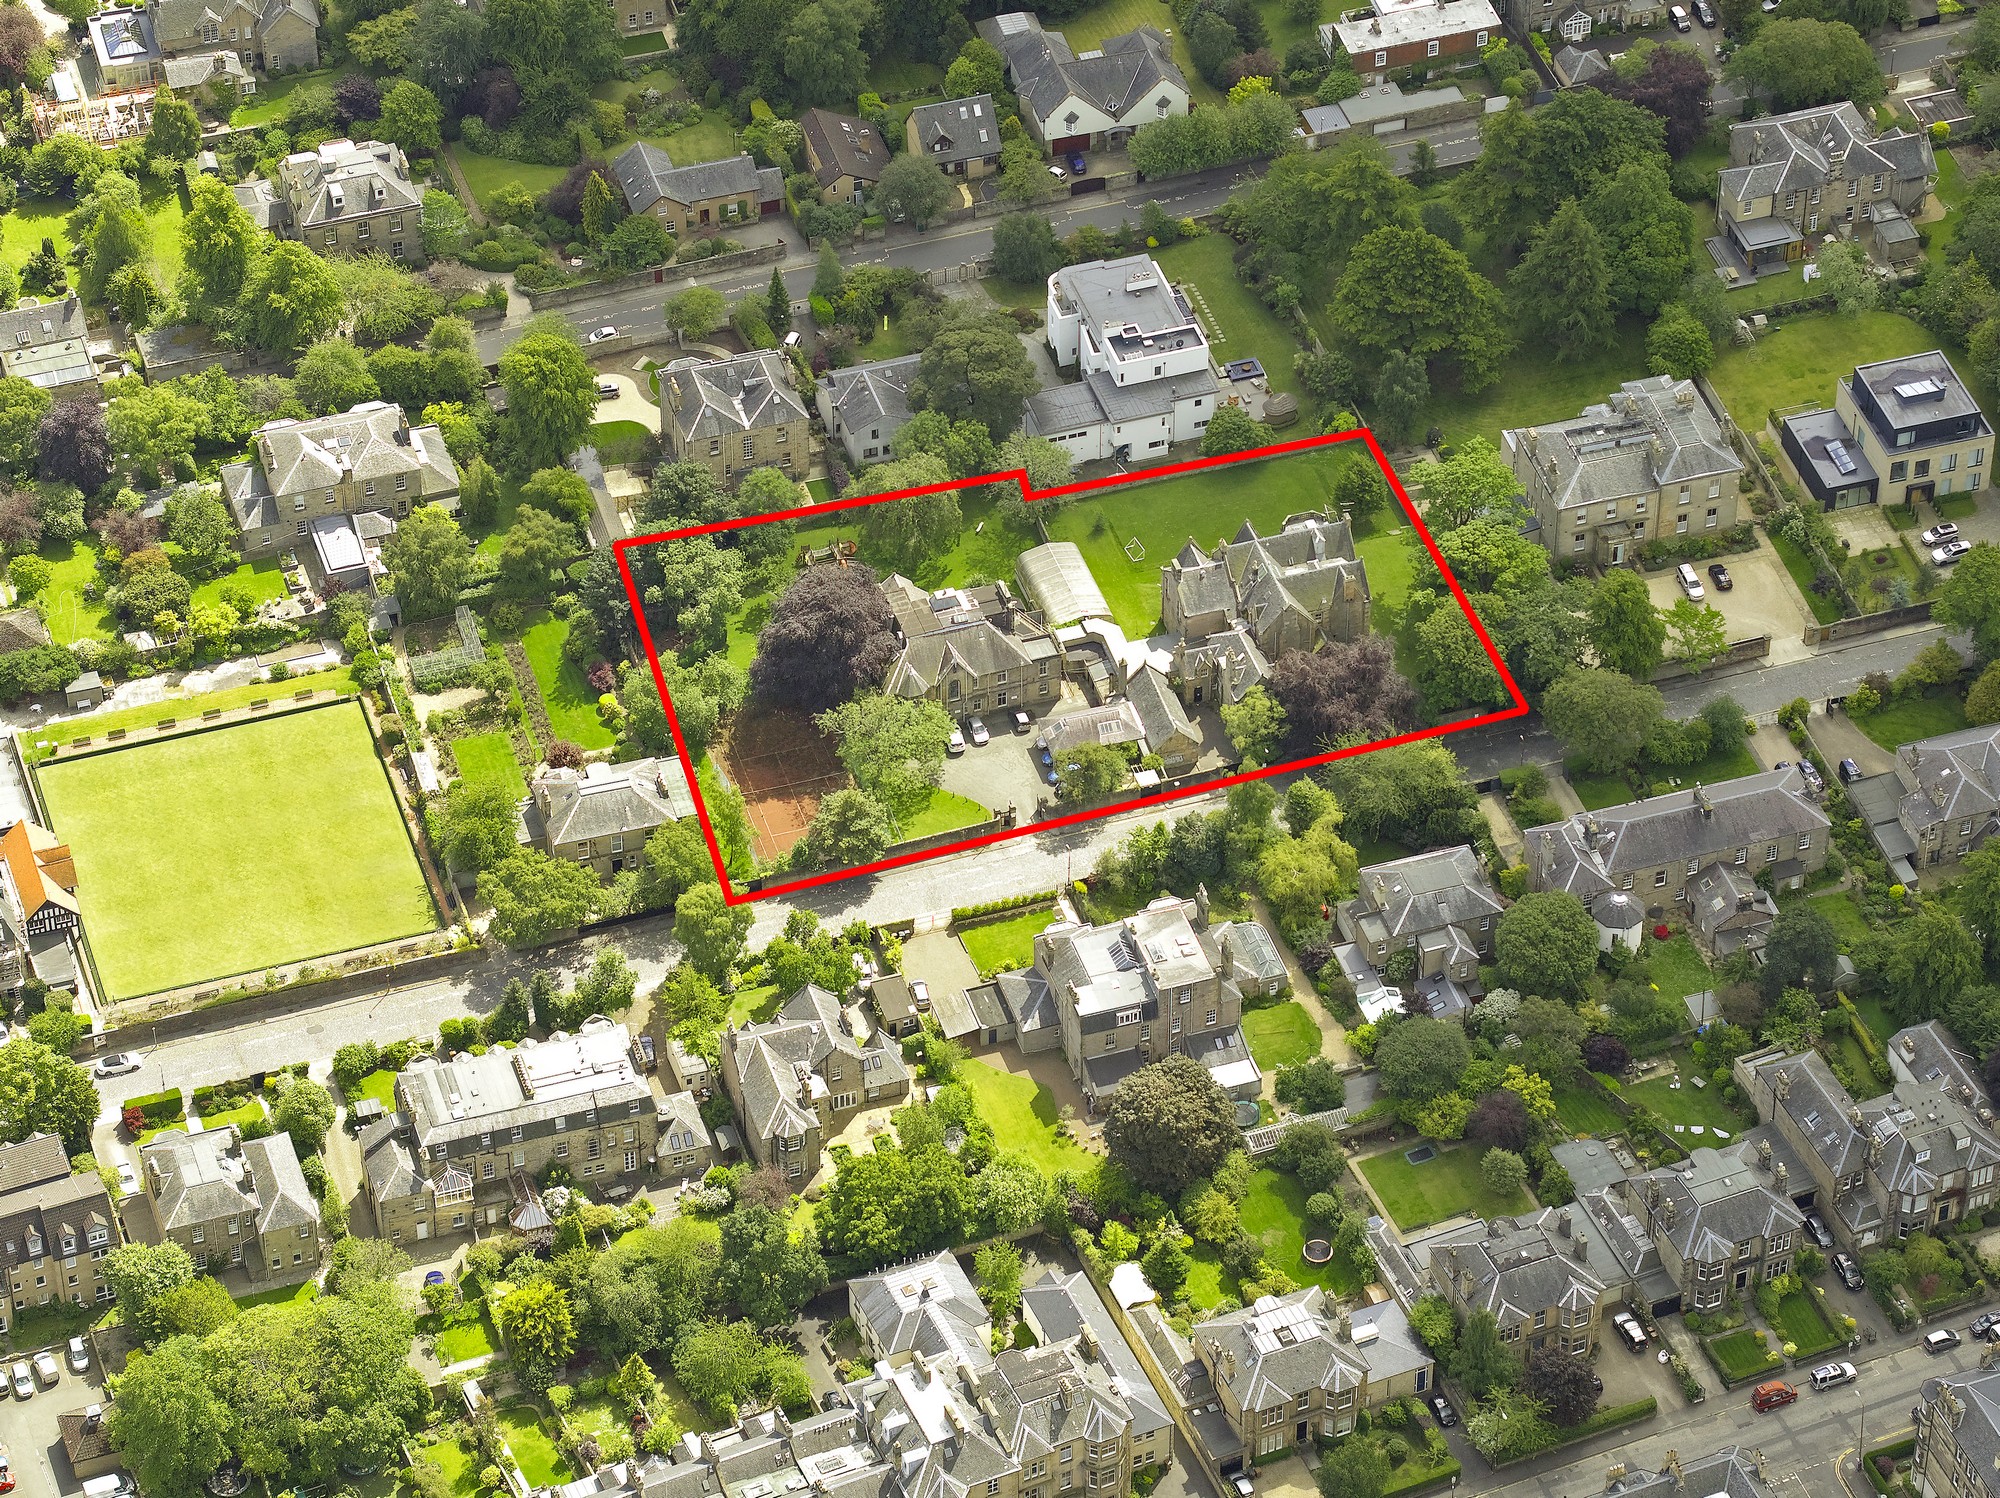 NHS Lothian properties sold for residential use